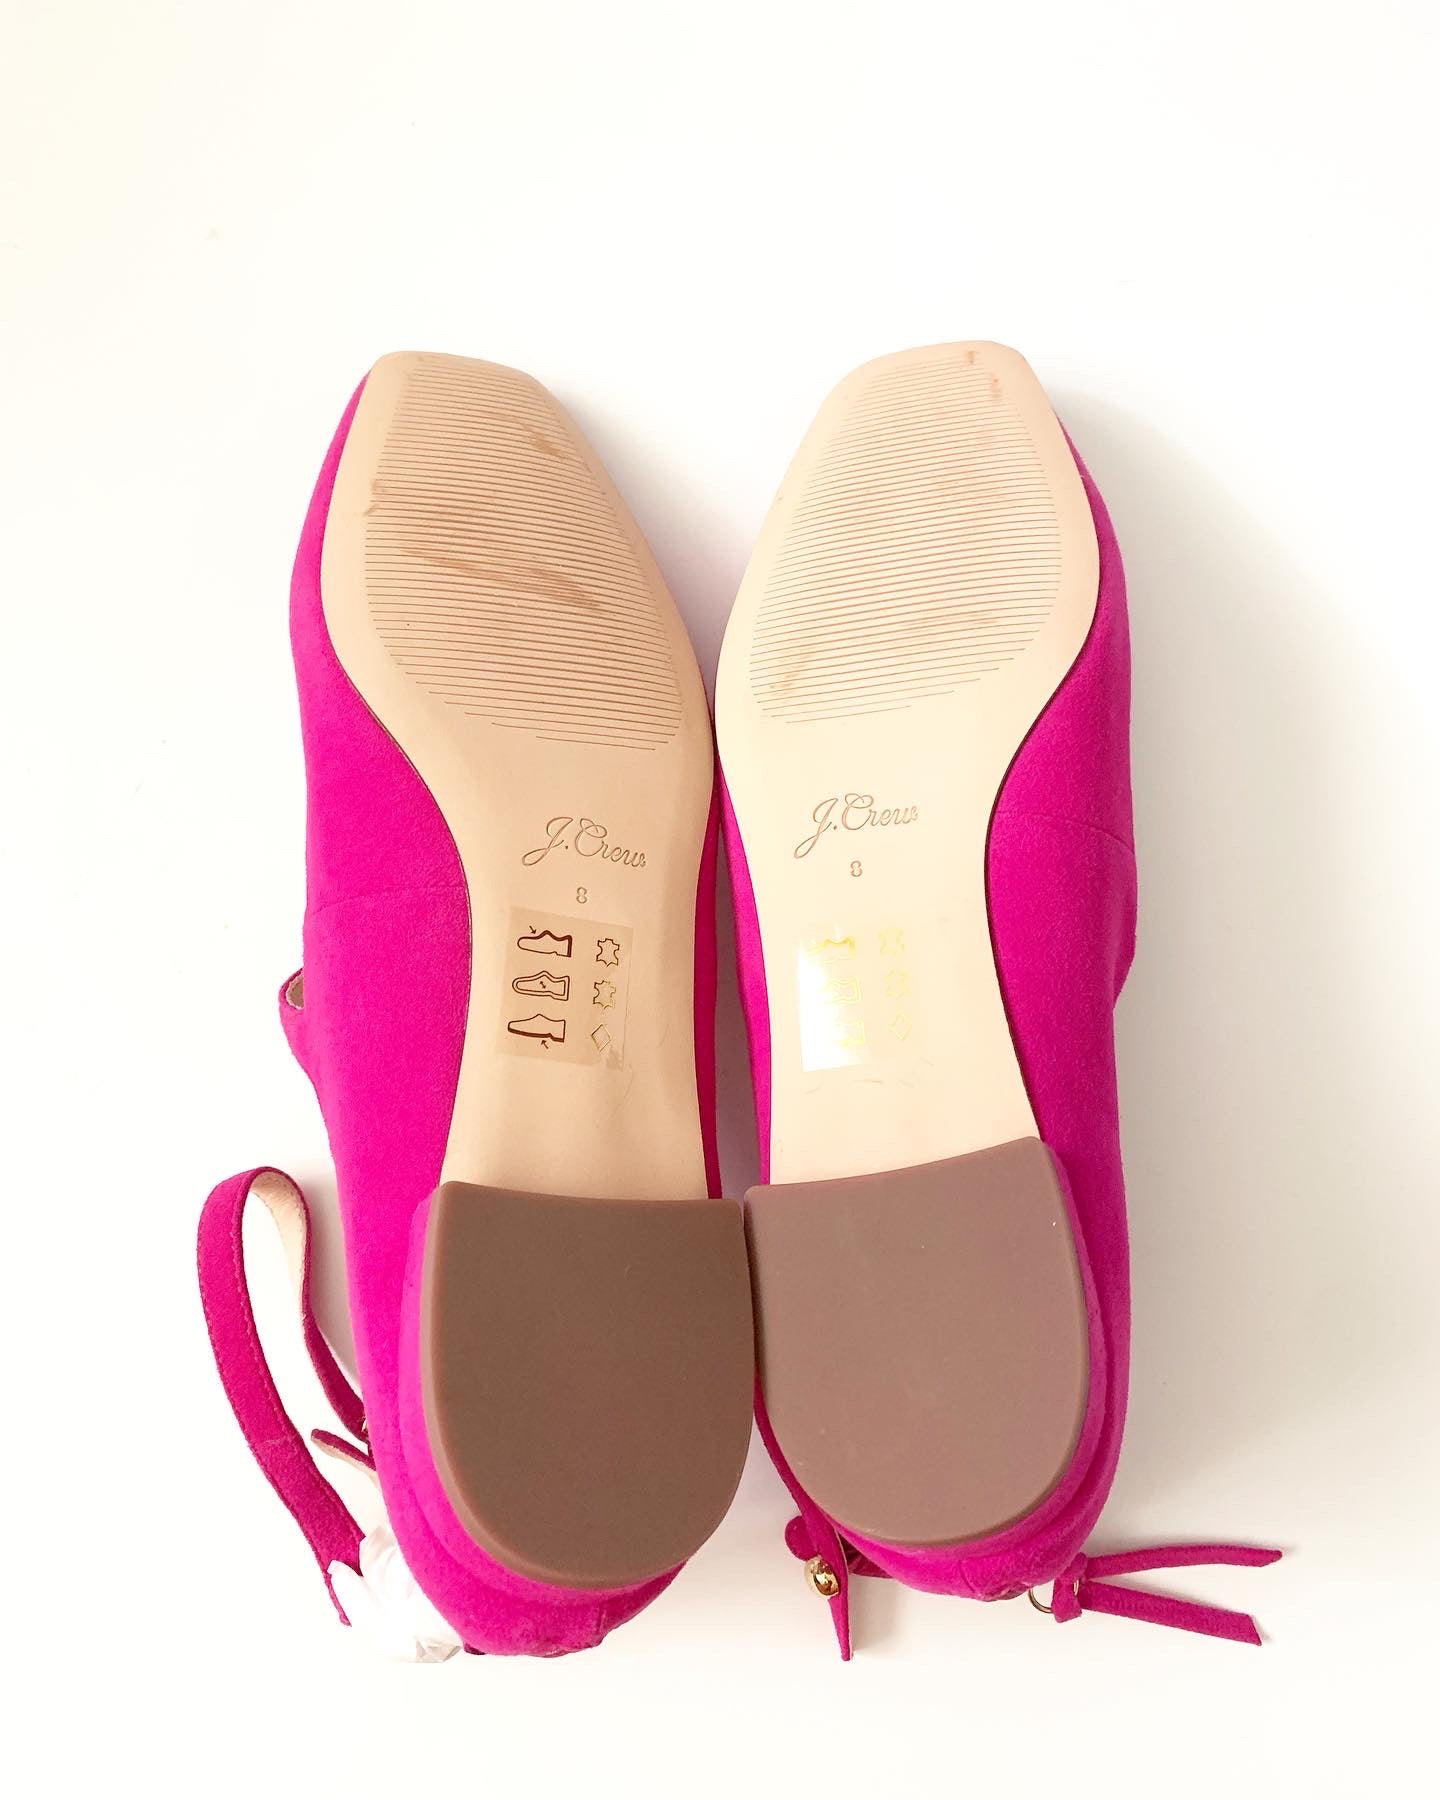 J. Crew Poppy Two-Strap Hot Begonia Pink Suede Leather Flat Shoes, Size 8